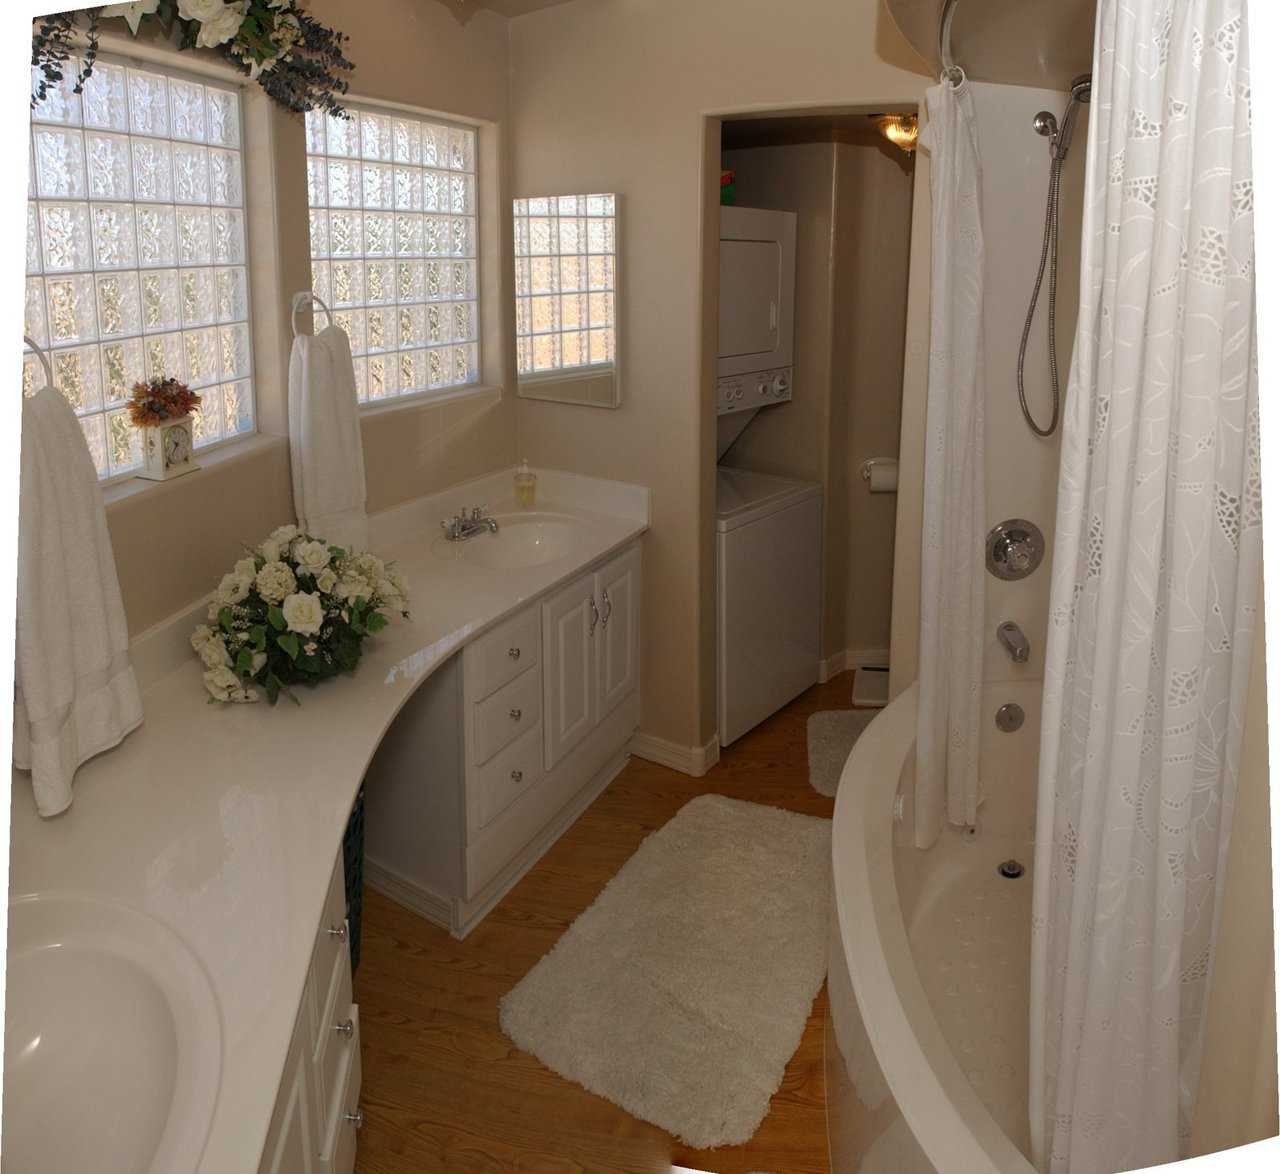 Master bath — Glass block windows allow light to penetrate this sparkling master bathroom. Stackable washer/dryer unit makes laundering convenient. Curved counter tops were custom-made to fit the dome’s curve.